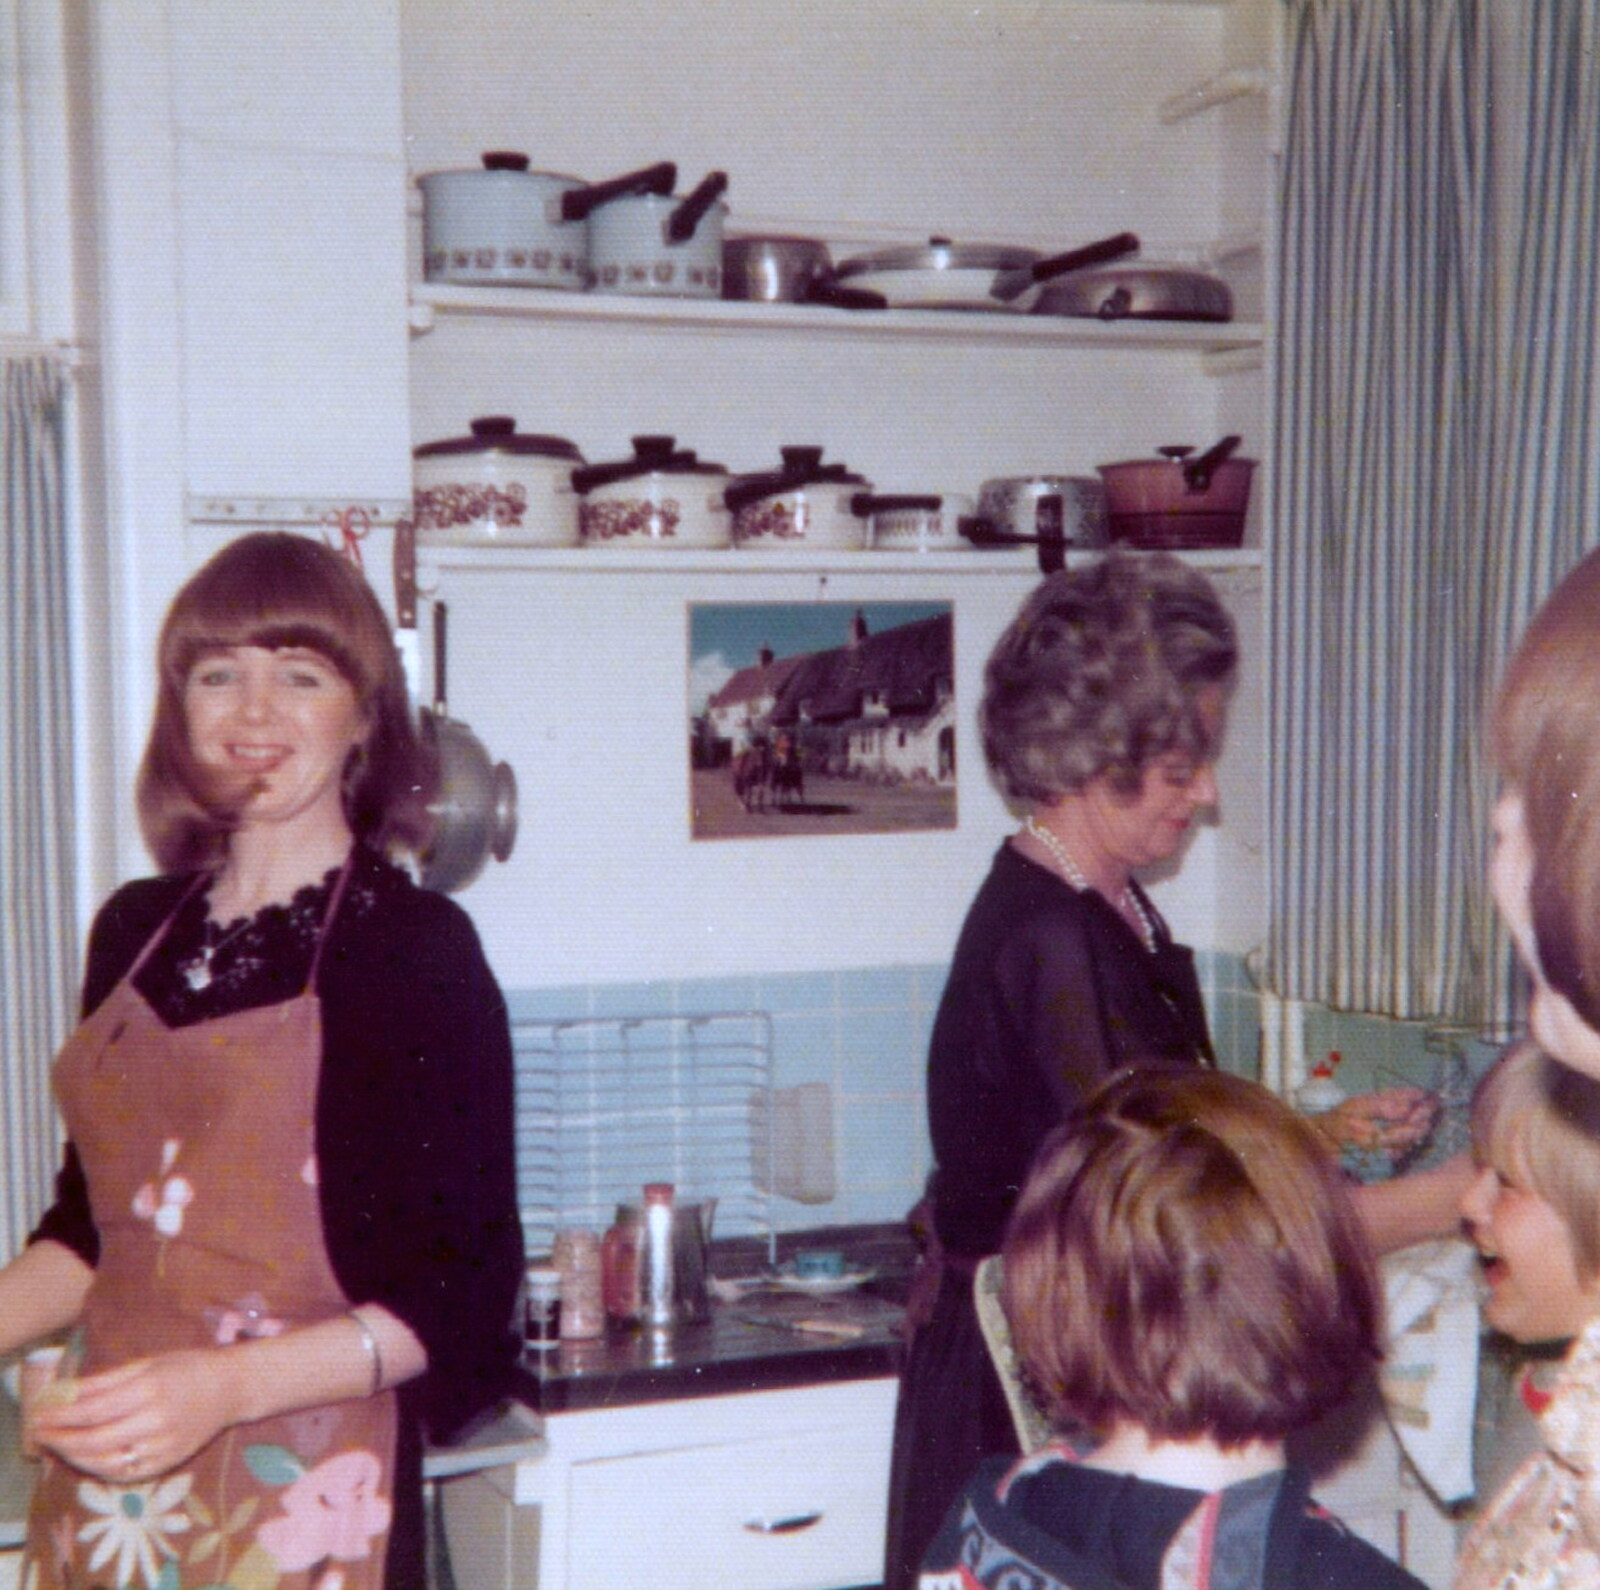 Family History: Danesbury Avenue, Tuckton, Christchurch, Dorset - 24th January 2020: It's all going off in the kitchen